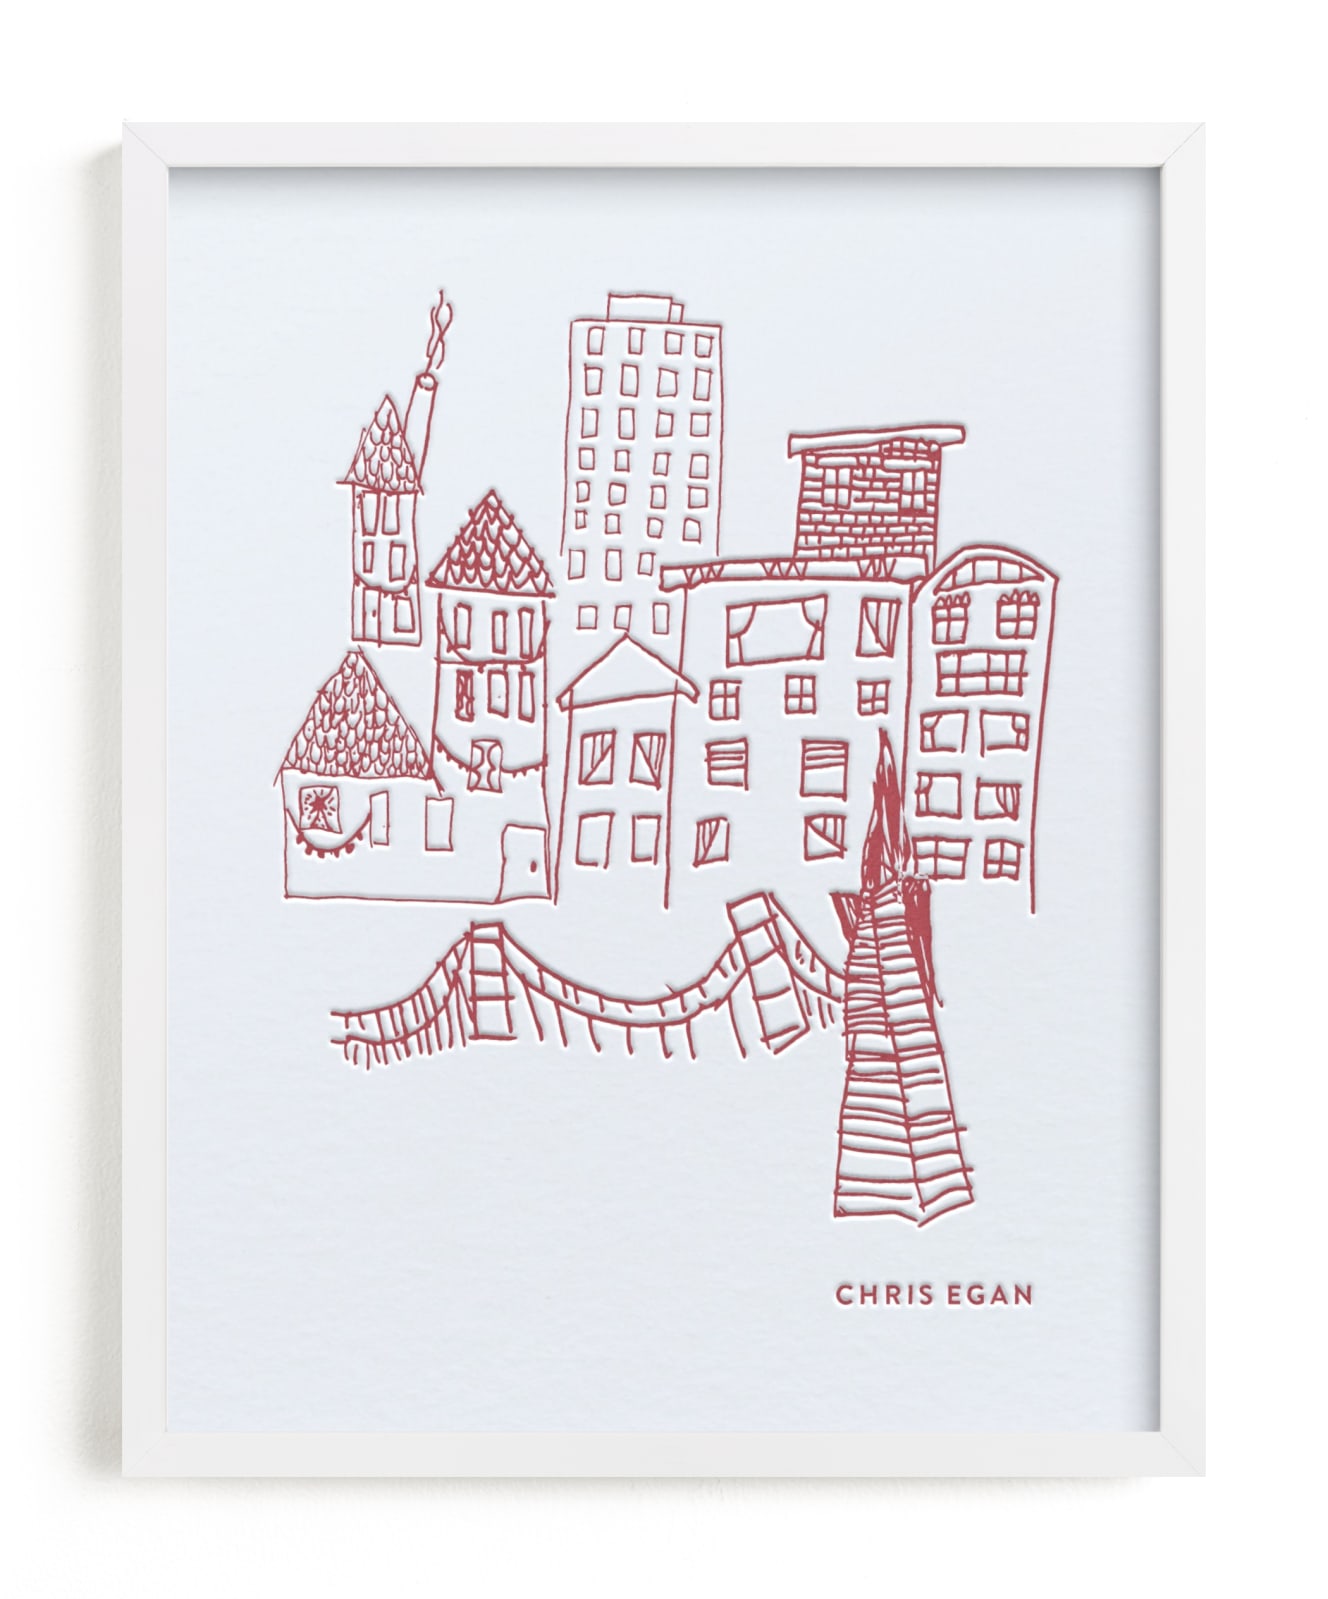 This is a red photos to art by Minted called Your Drawing as Letterpress Art Print.